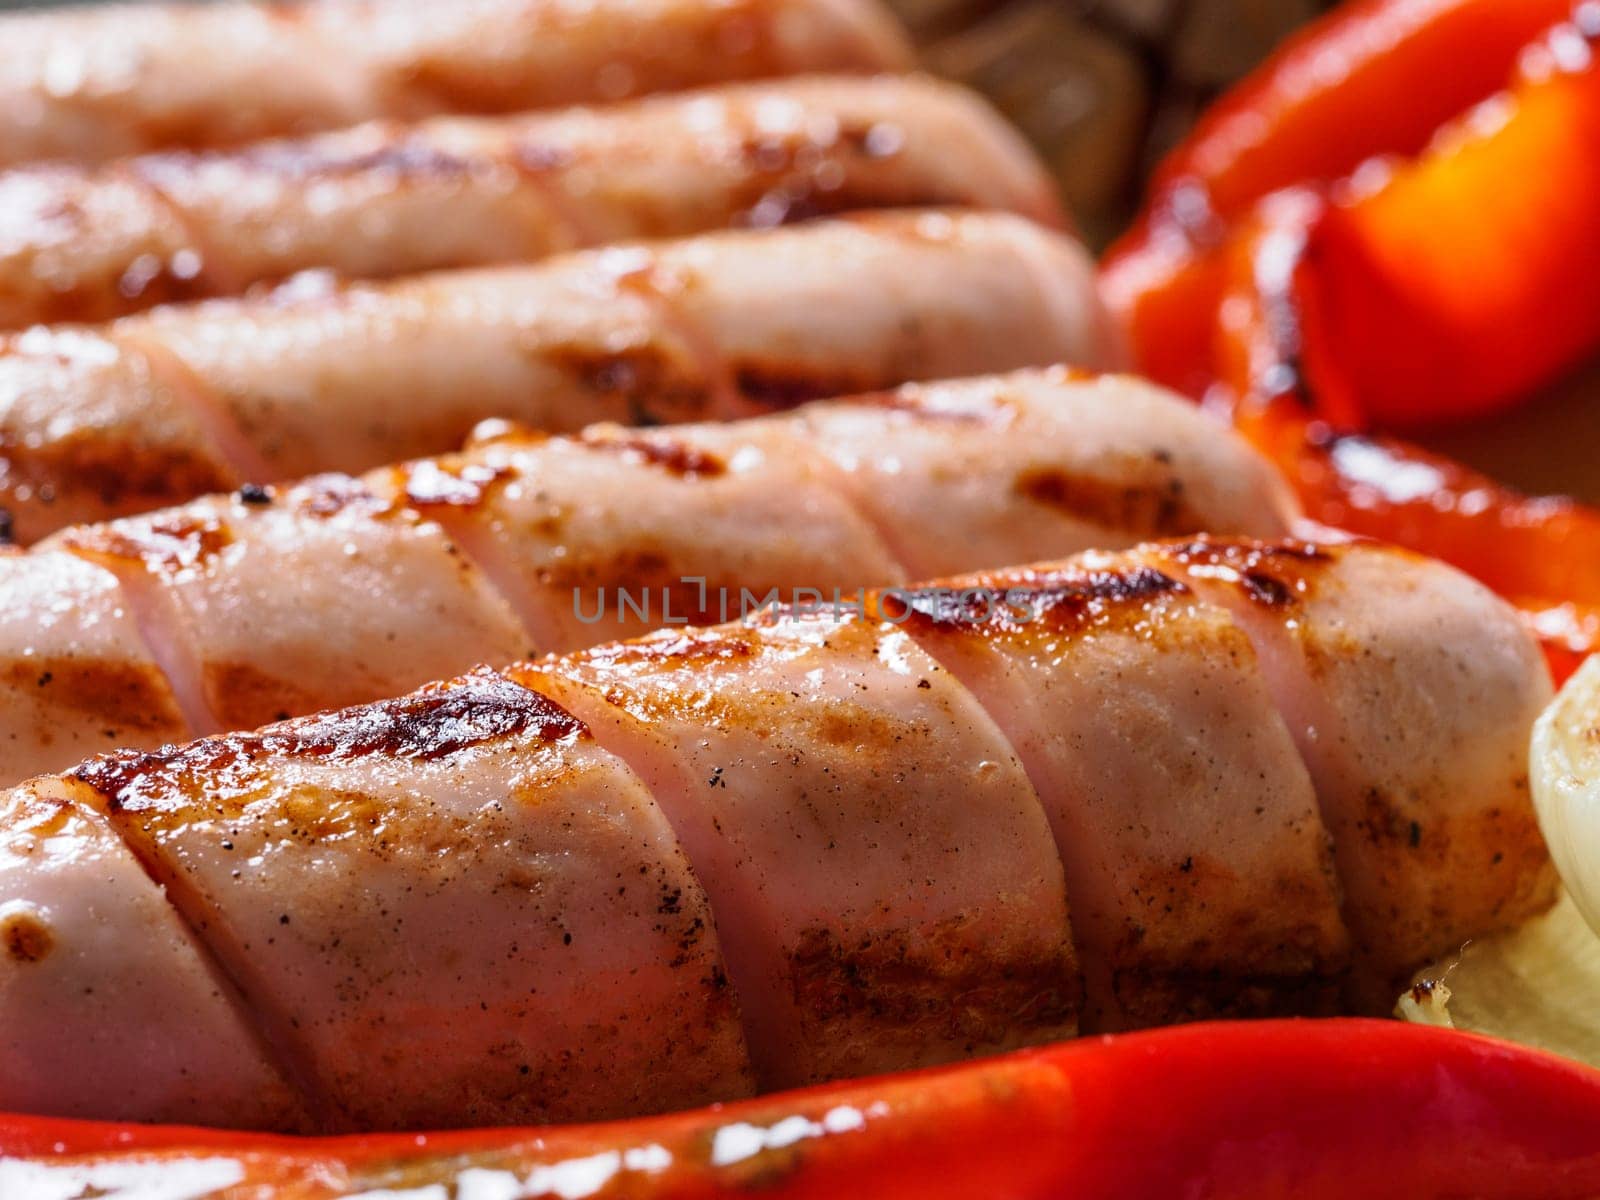 Close up view of chicken homemade sausages. Grilled sausages and grilled vegetables. Copy space.